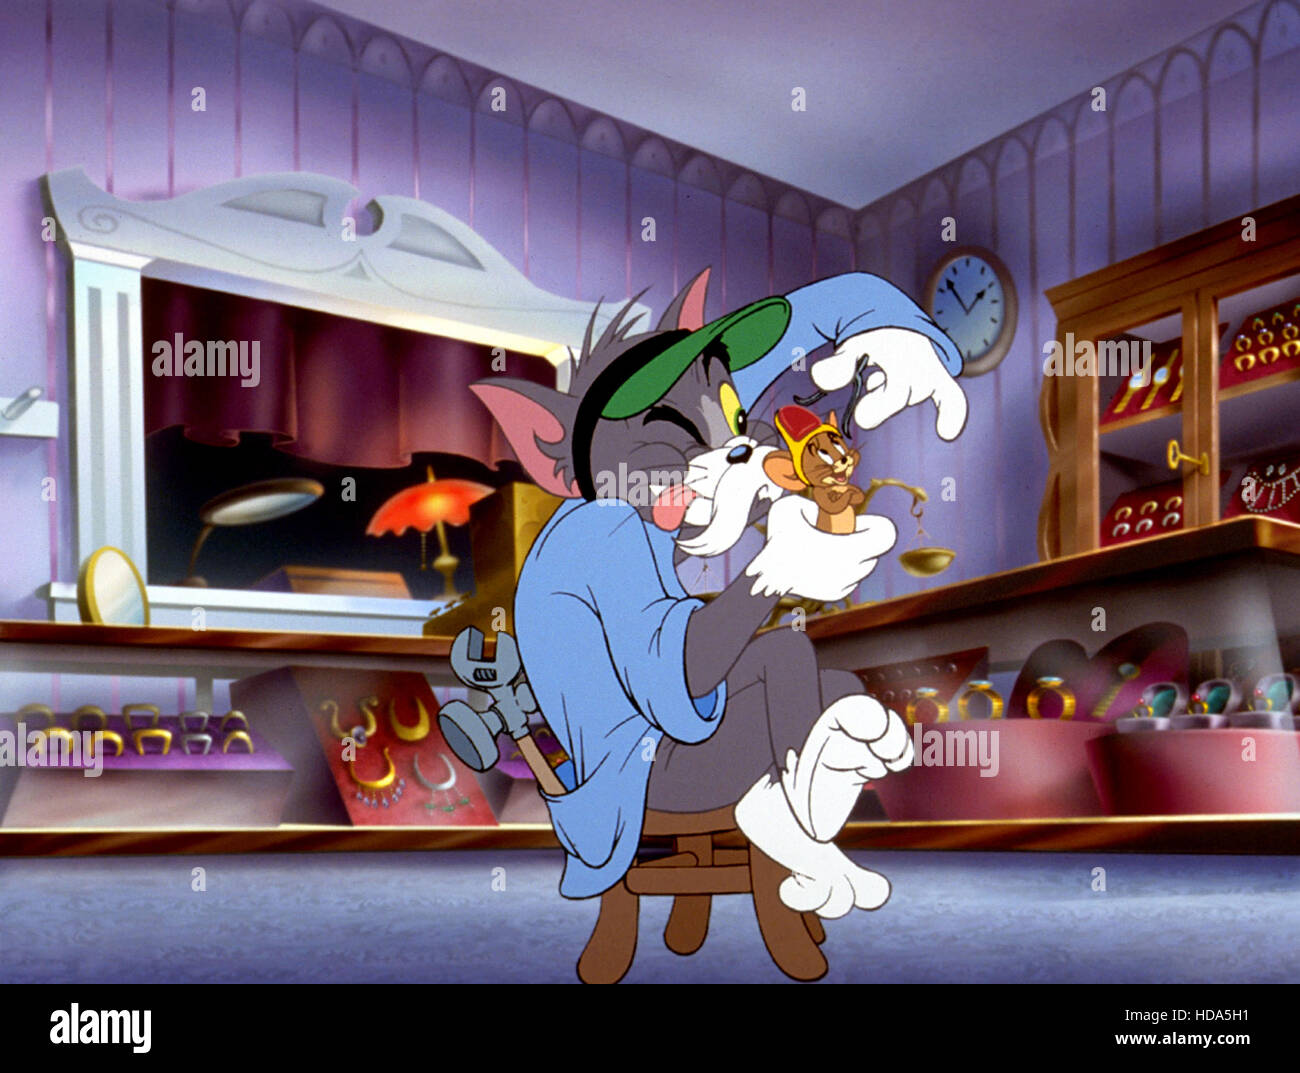 TOM AND JERRY: THE MAGIC RING, Tom and Jerry (Tom Cat, Jerry Mouse), 2002  Stock Photo - Alamy